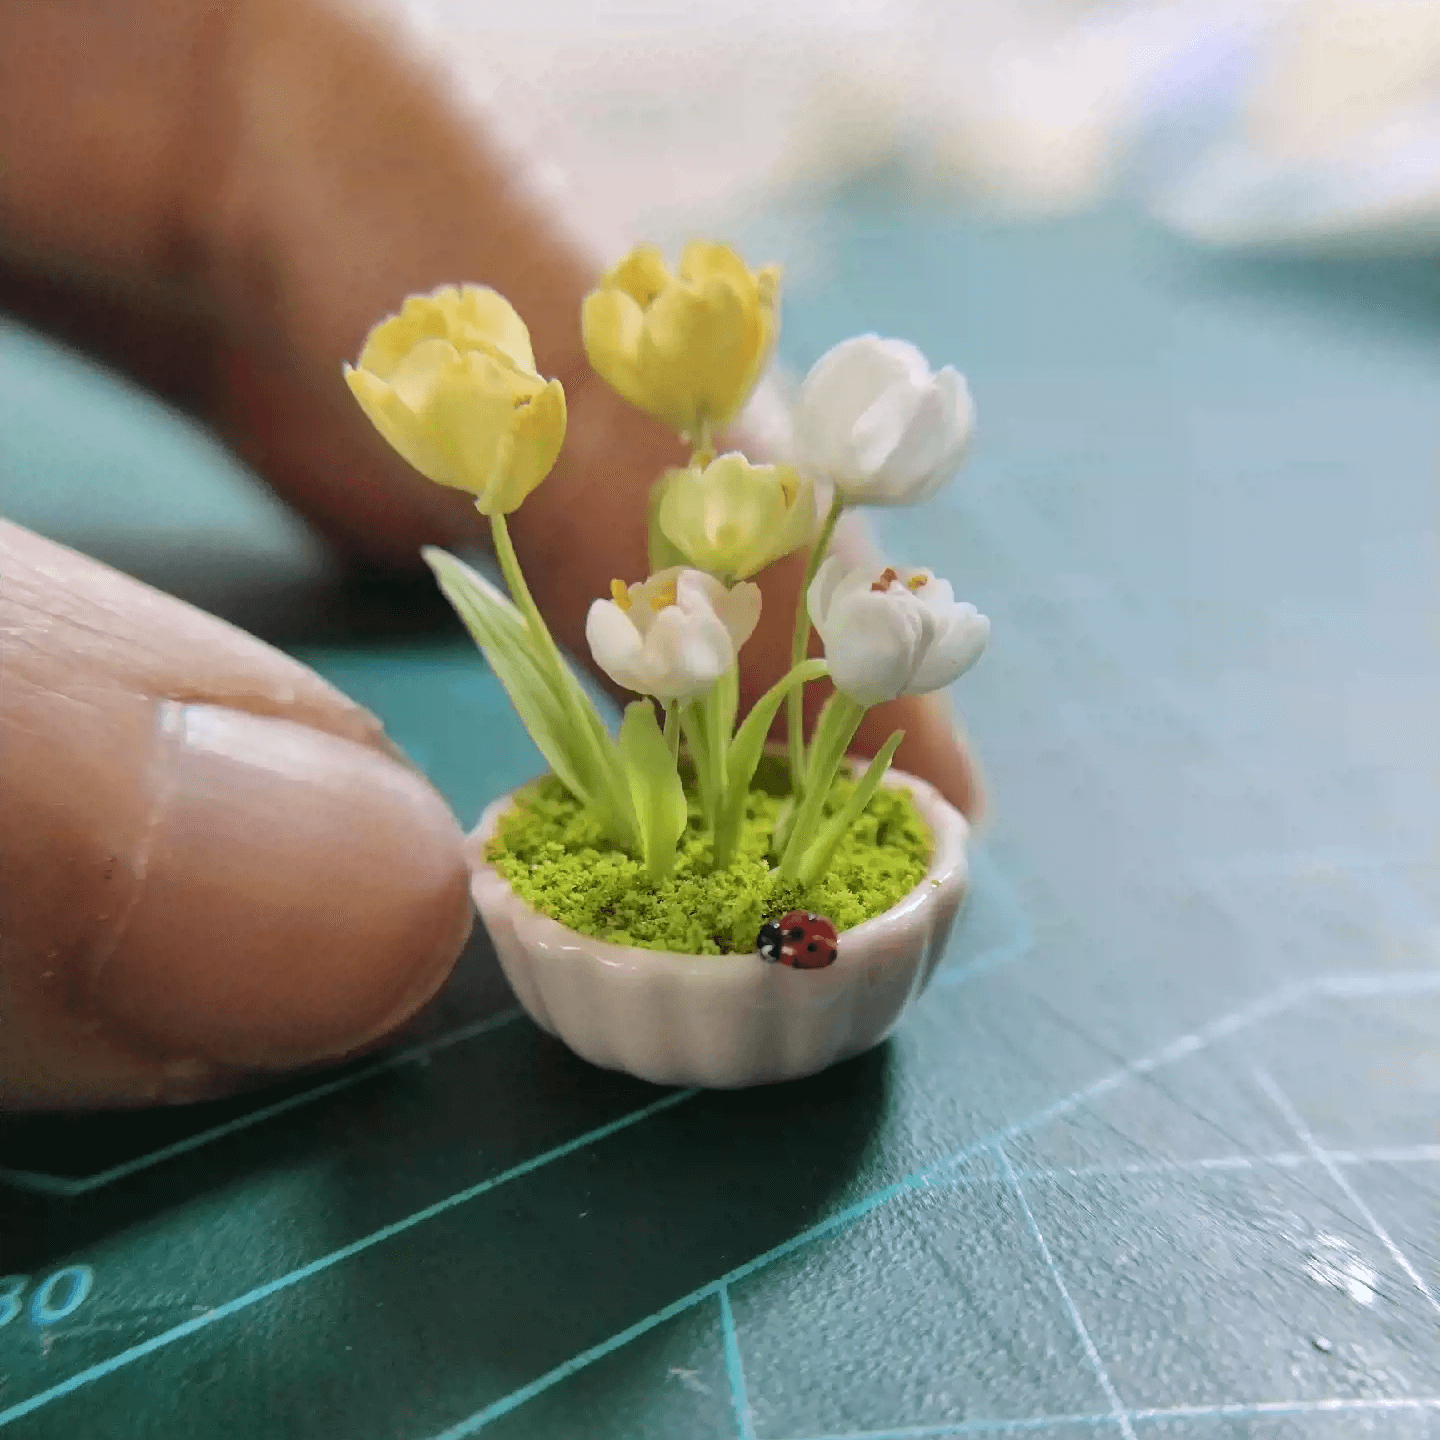 Tulips are erect flowers with long, broad, parallel-veined leaves and a cup-shaped, single or double flower at the tip of the stem.  Material: Handmade from Clay